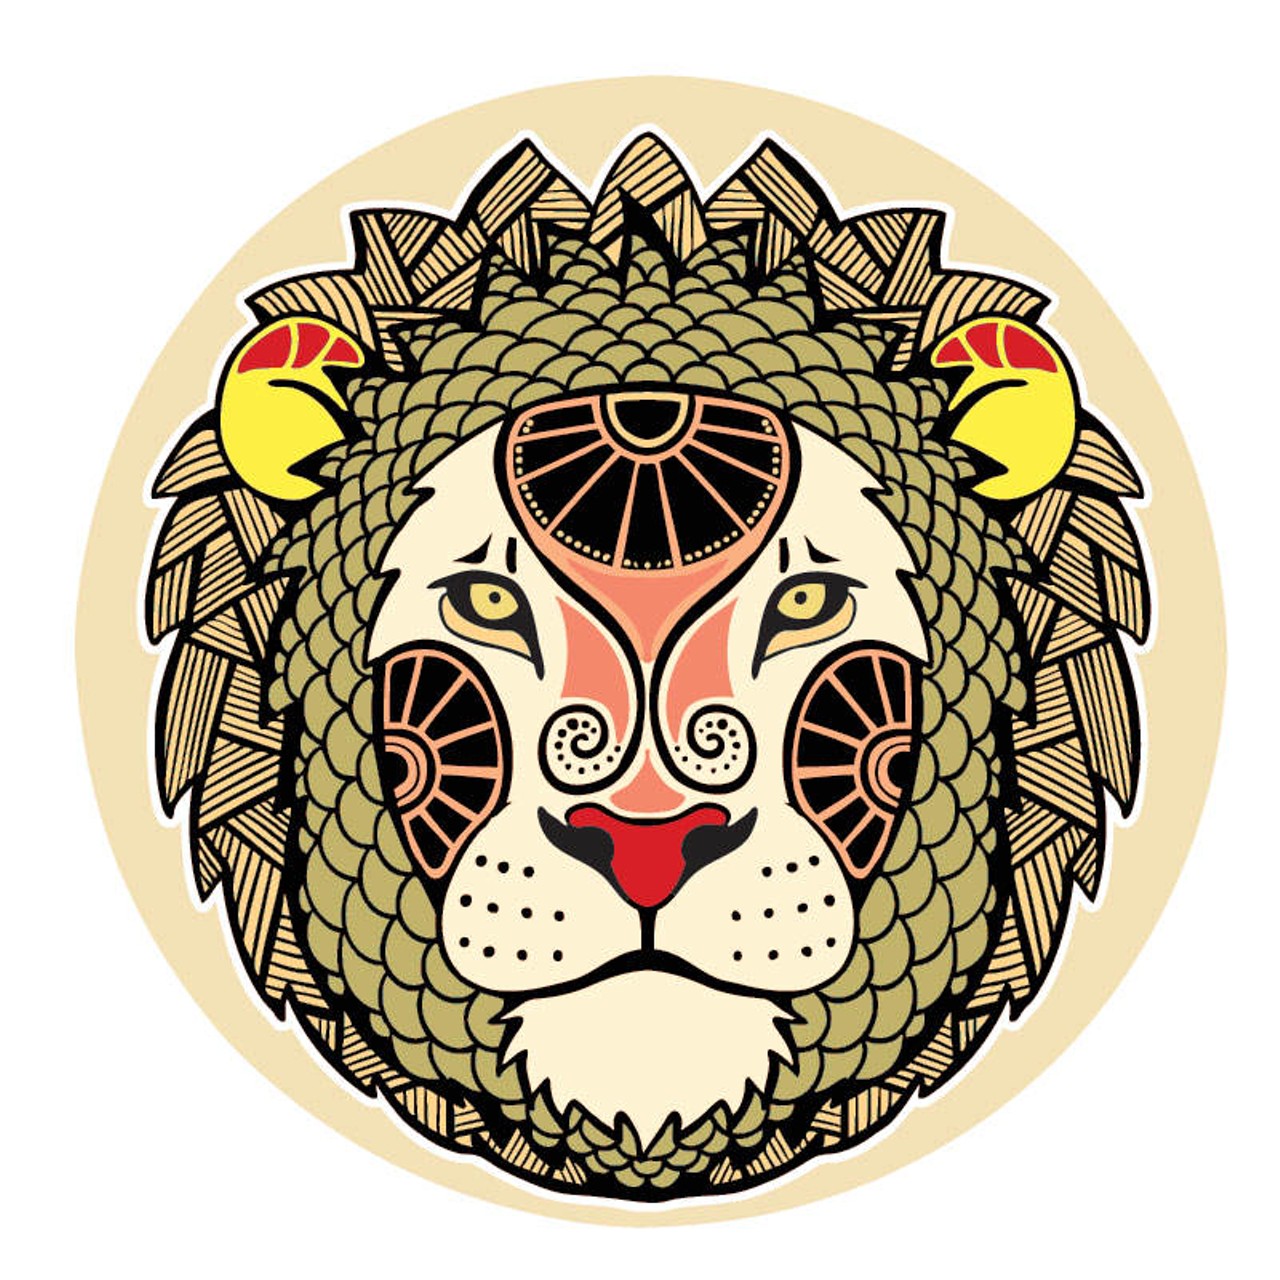 LEO&nbsp;(July 21-Aug. 20): 
For the last seven years it feels like you've been sitting in some form of limbo. Within a few months, whatever all of it has been leading to will be punctuated by a major milestone. What form it takes could lead to anything from a move, or to the end of an era or a relationship. If you wonder how the chips will fall keep in mind that most of you are already well aware of what needs to pass away. At times like this it is important to remember that everything comes and goes. In your case, it comes down to being prepared for changes that are about to turn your life around.